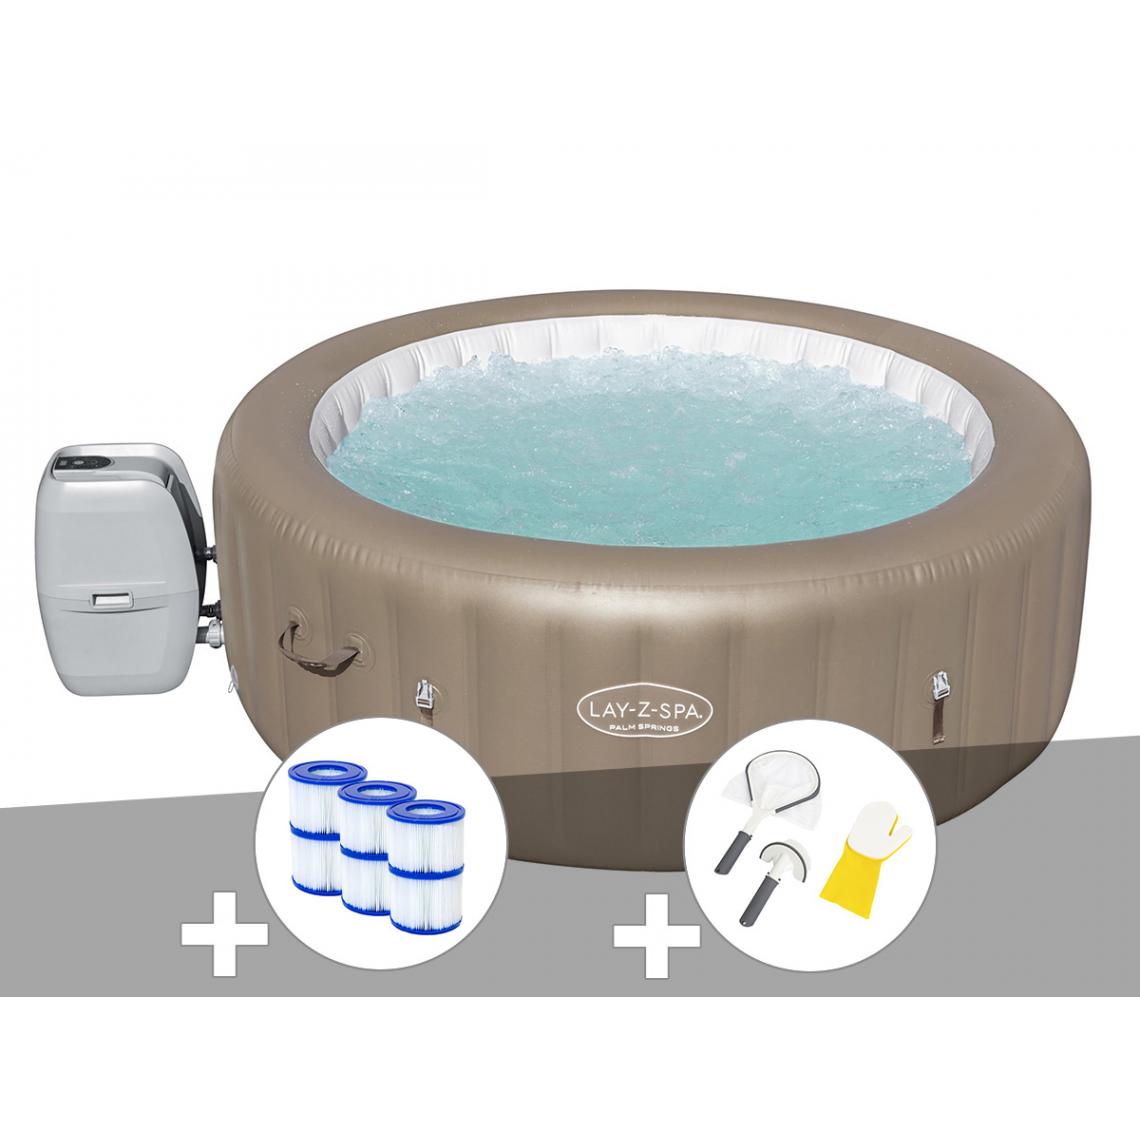 Bestway - Kit spa gonflable Bestway Lay-Z-Spa Palm Springs rond Airjet 4/6 places + 6 filtres + Kit de nettoyage - Spa gonflable